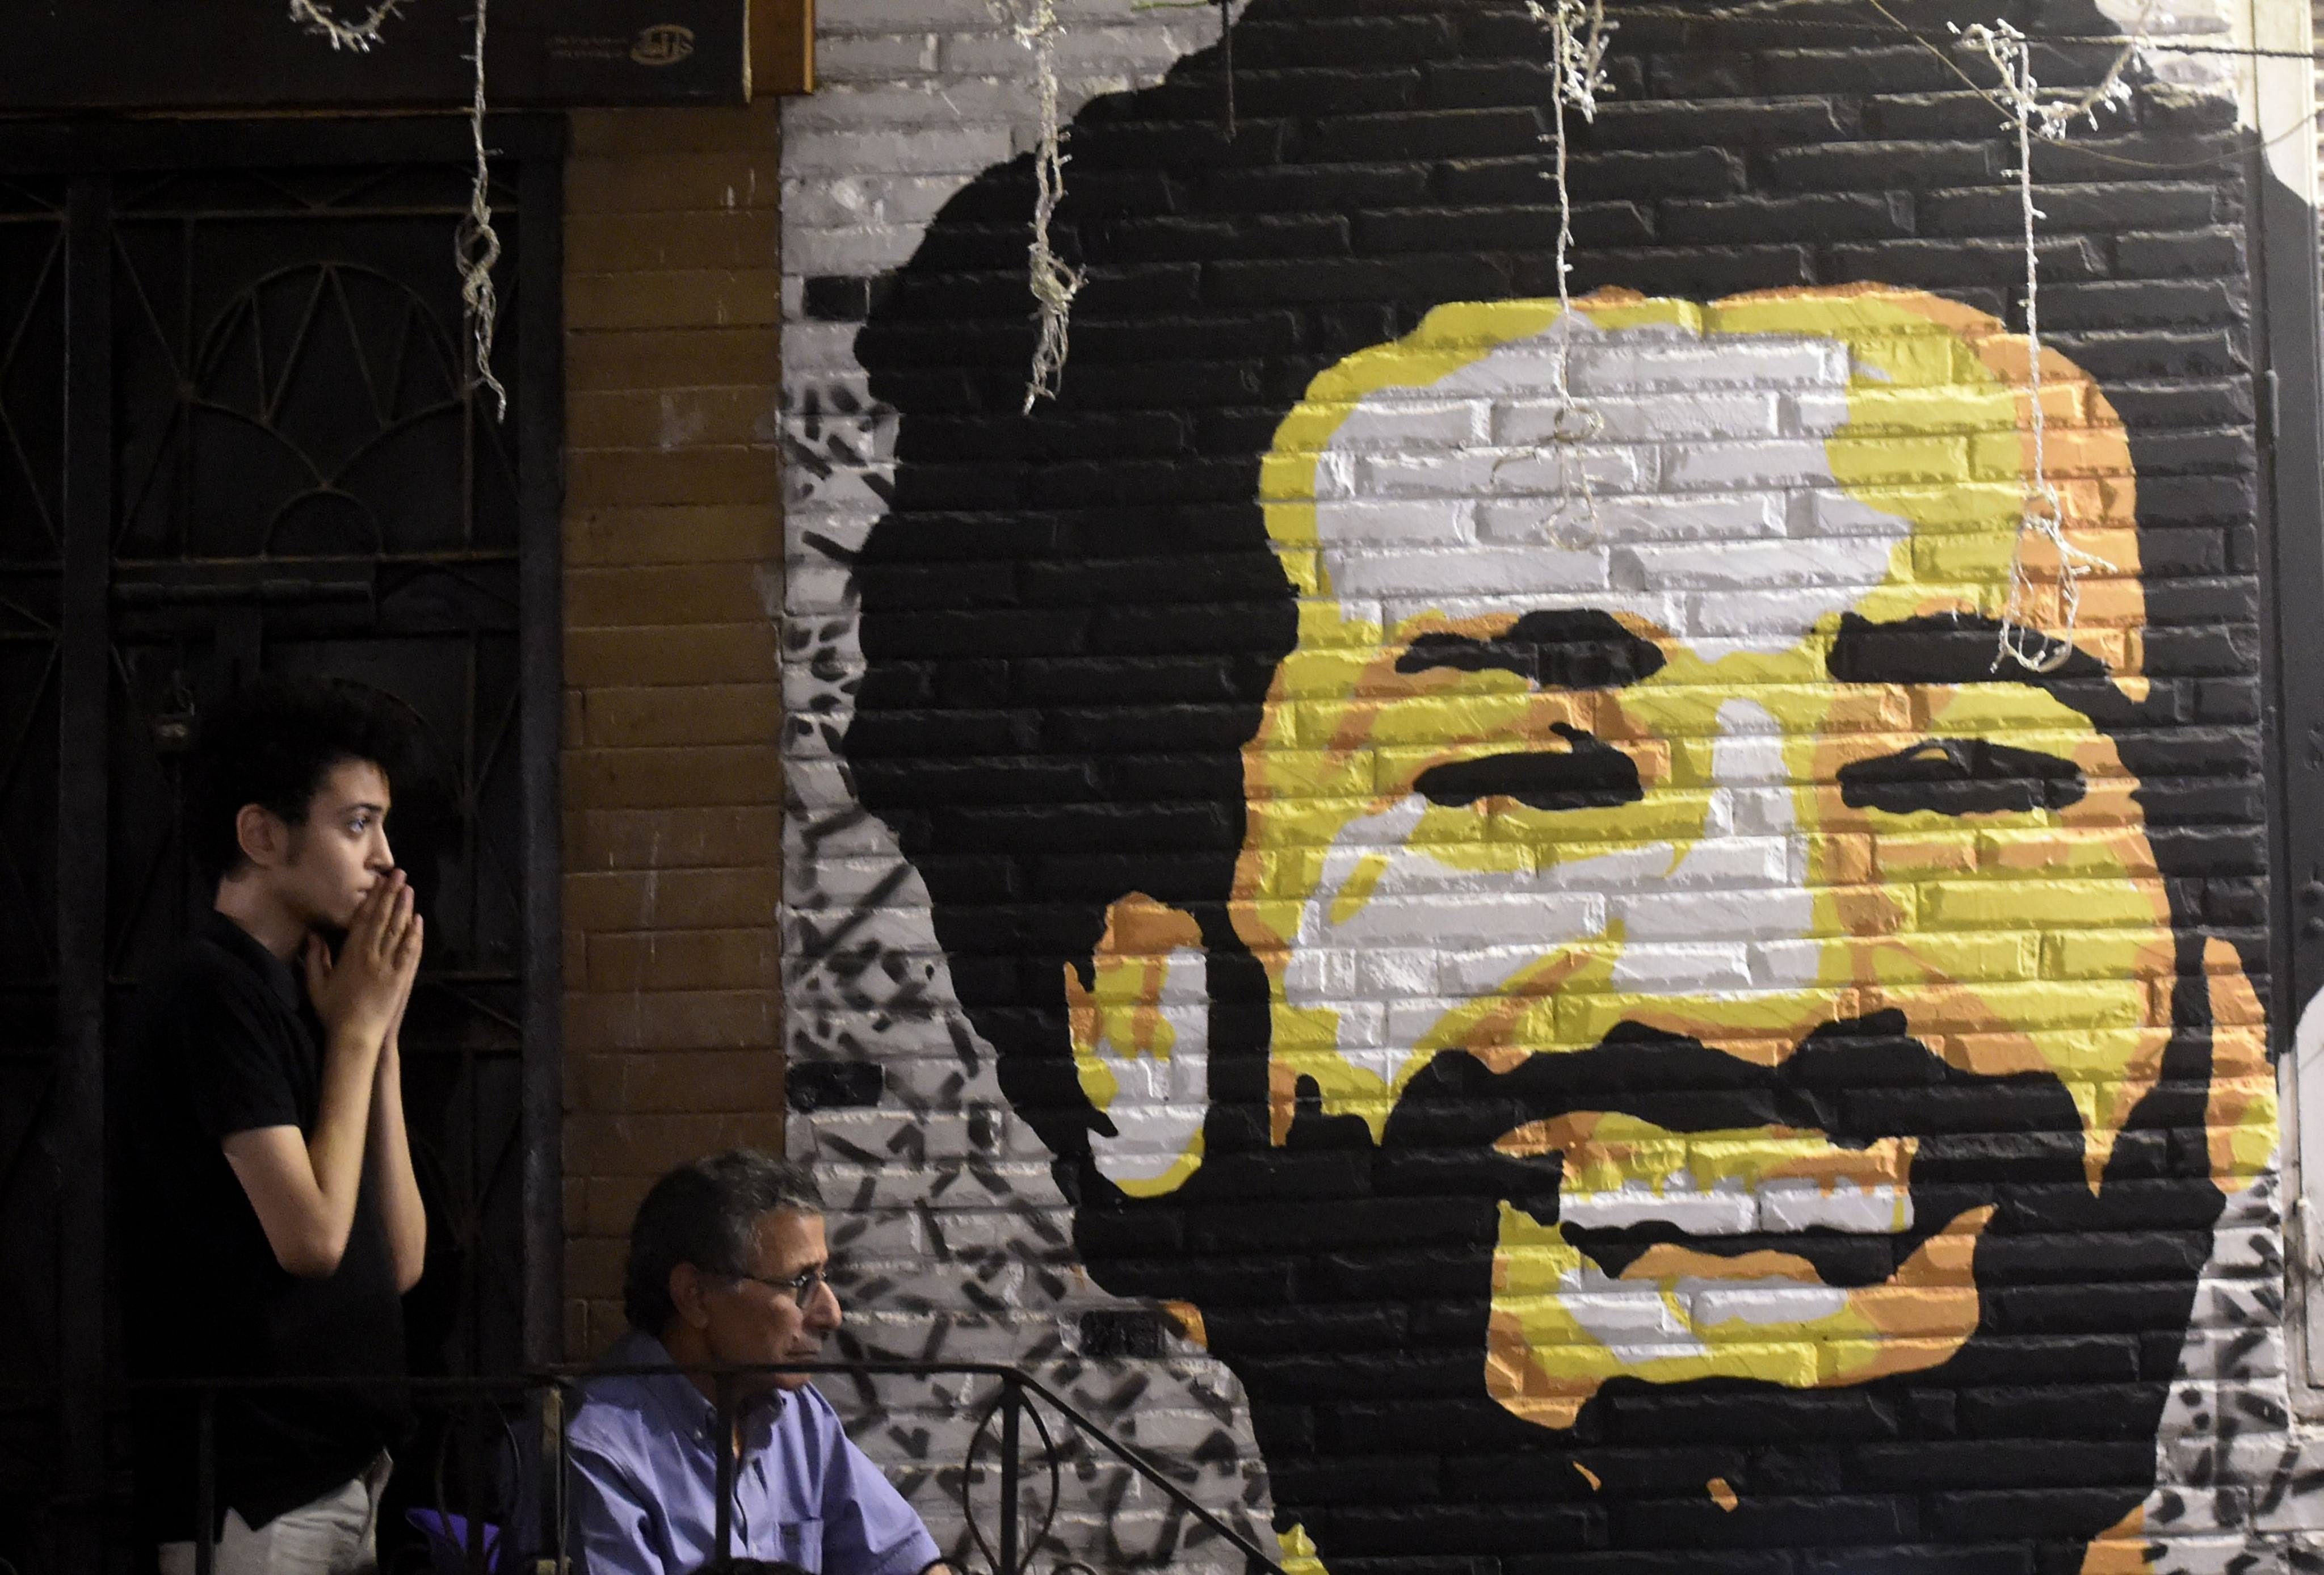 Mohamed Salah is revered in Egypt but came under criticism from his former national team coach. Photo: AFP